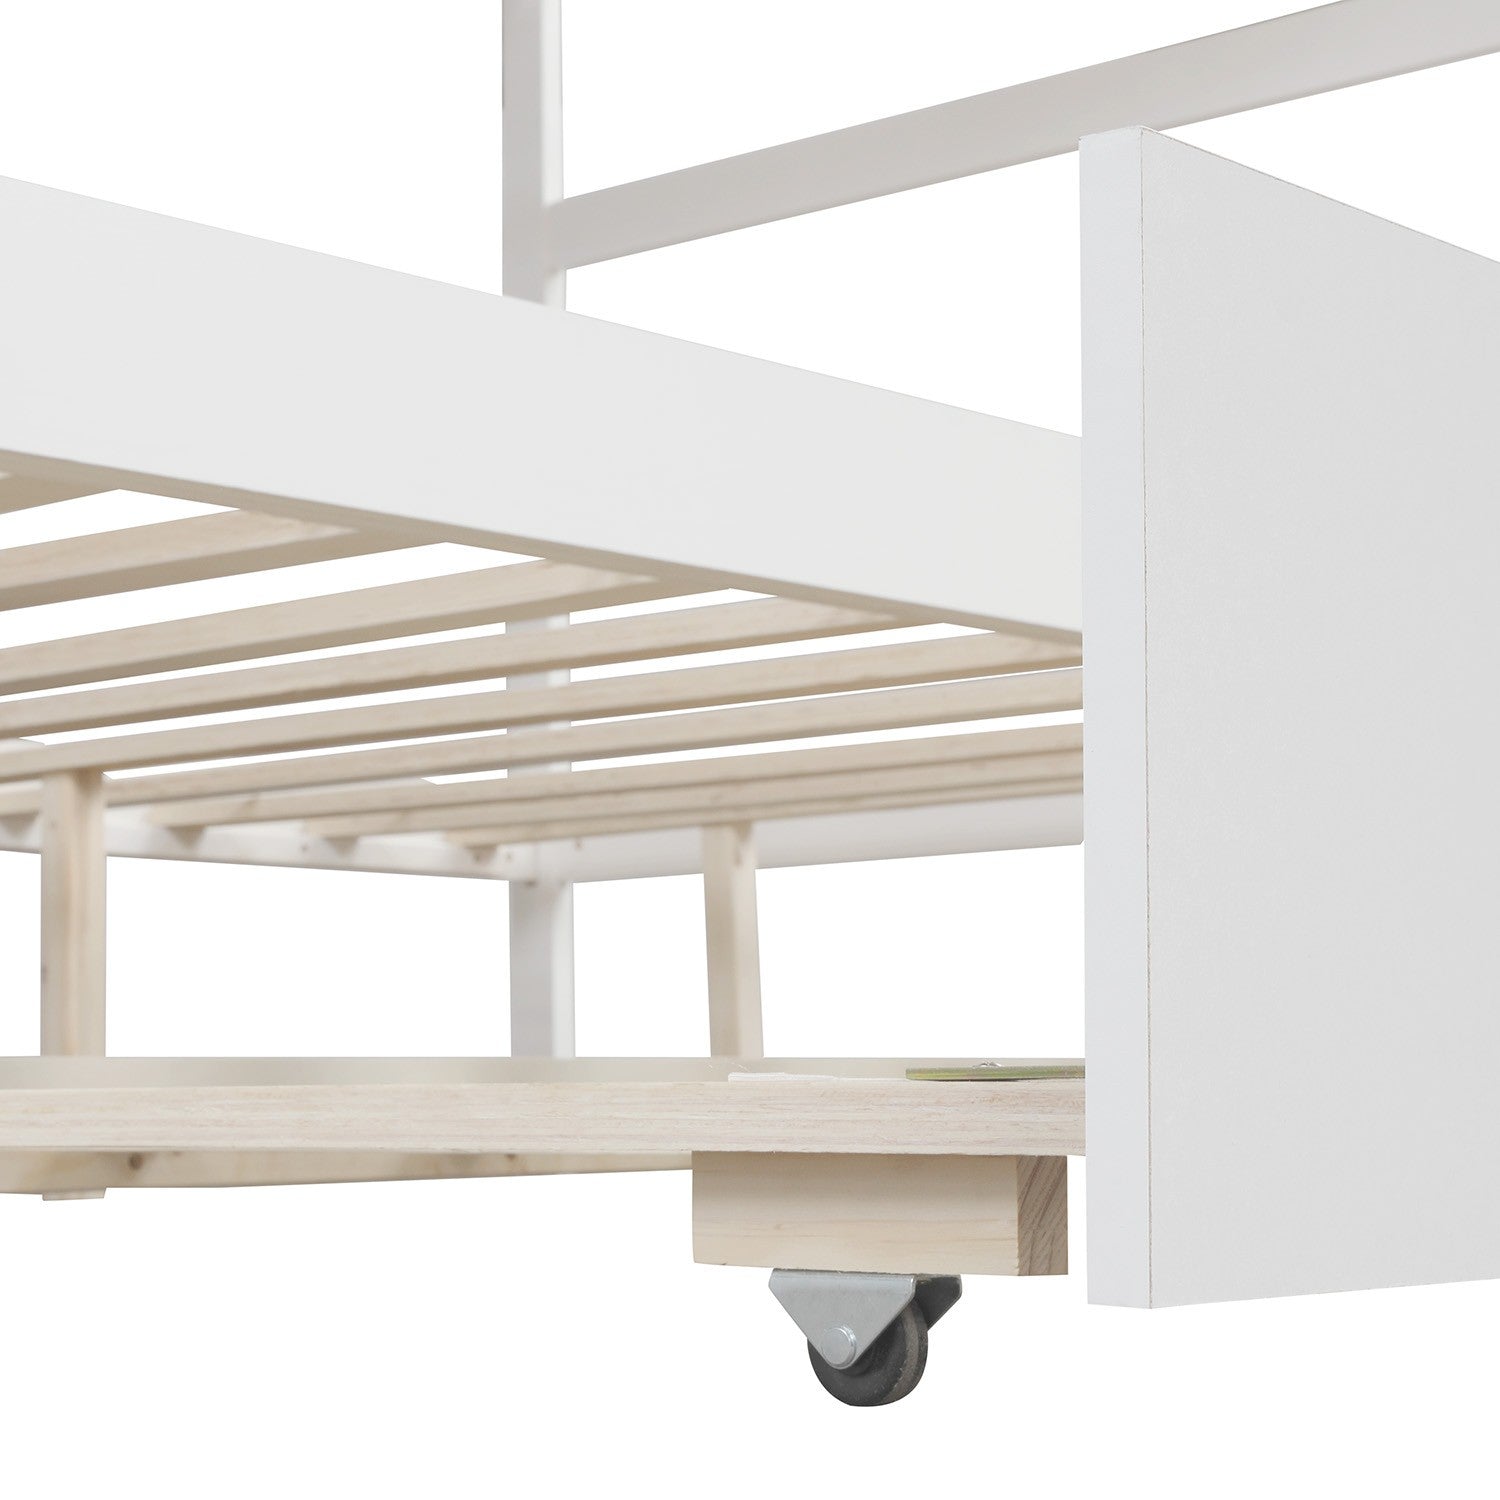 White Full Over Full Contemporary Bunk Bed With Stairs